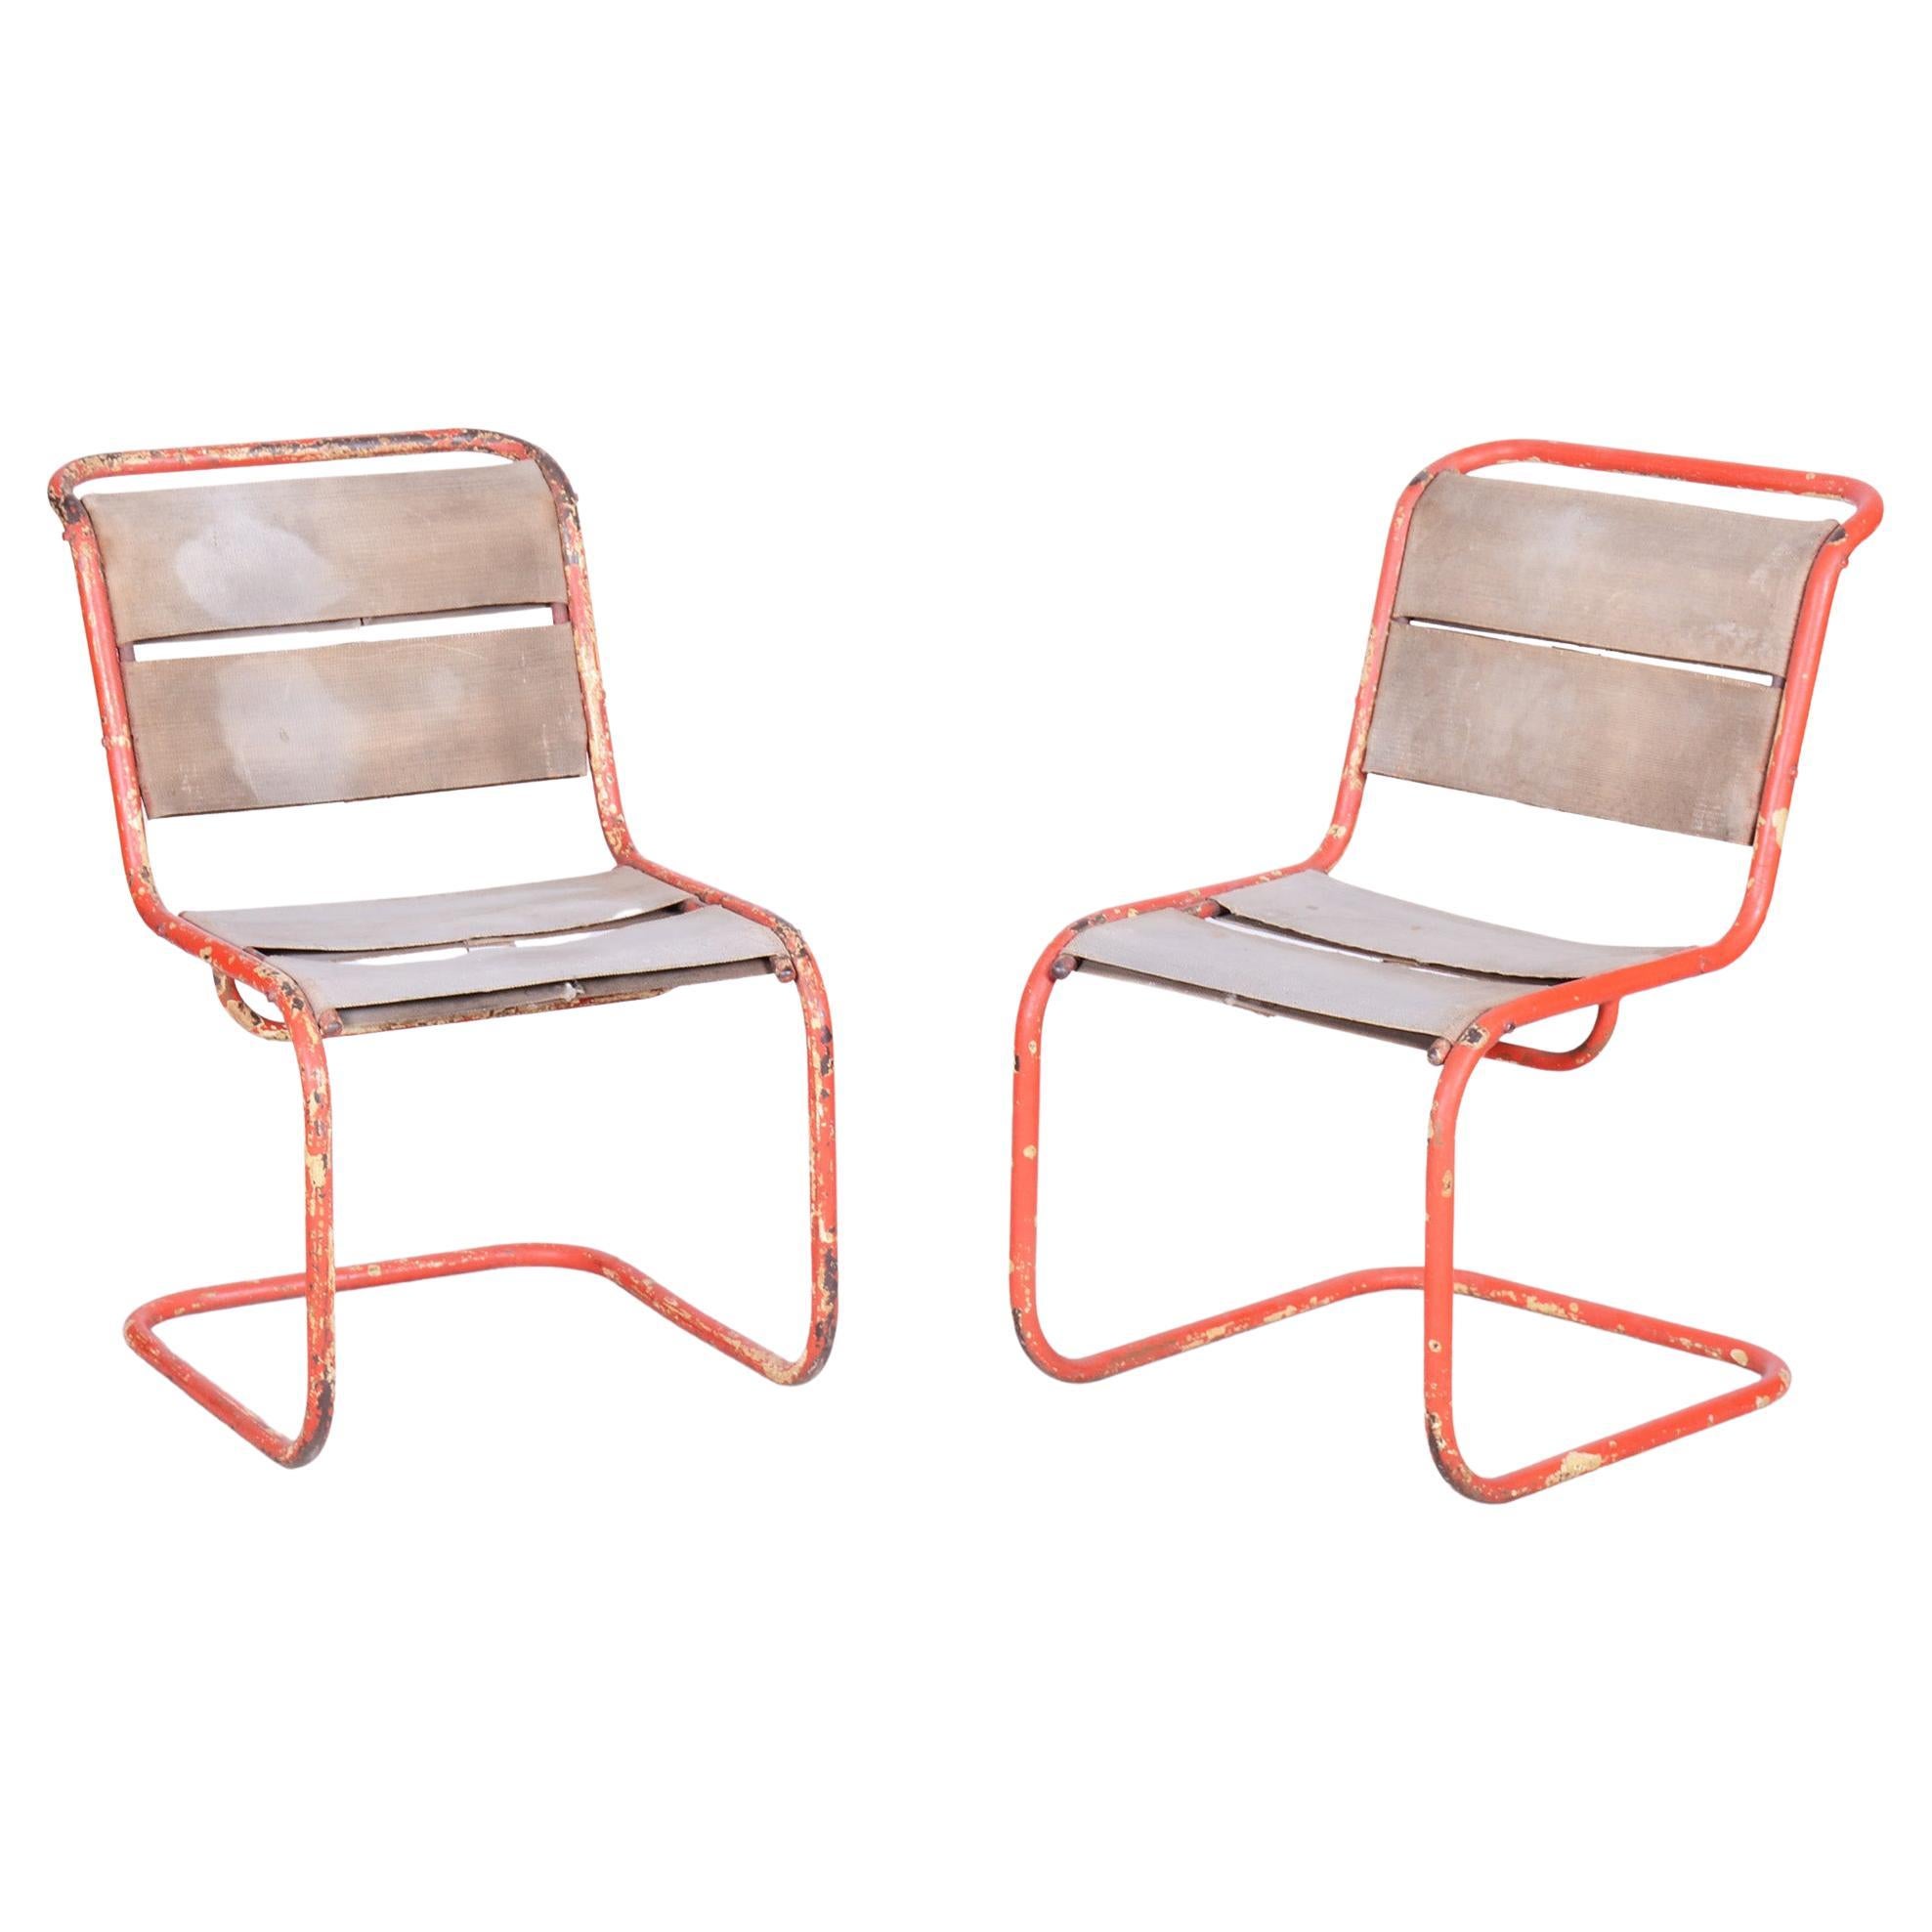 Original Pair of Chairs by Josef Gocar, Lacquered Steel, Czechia, 1930s For Sale